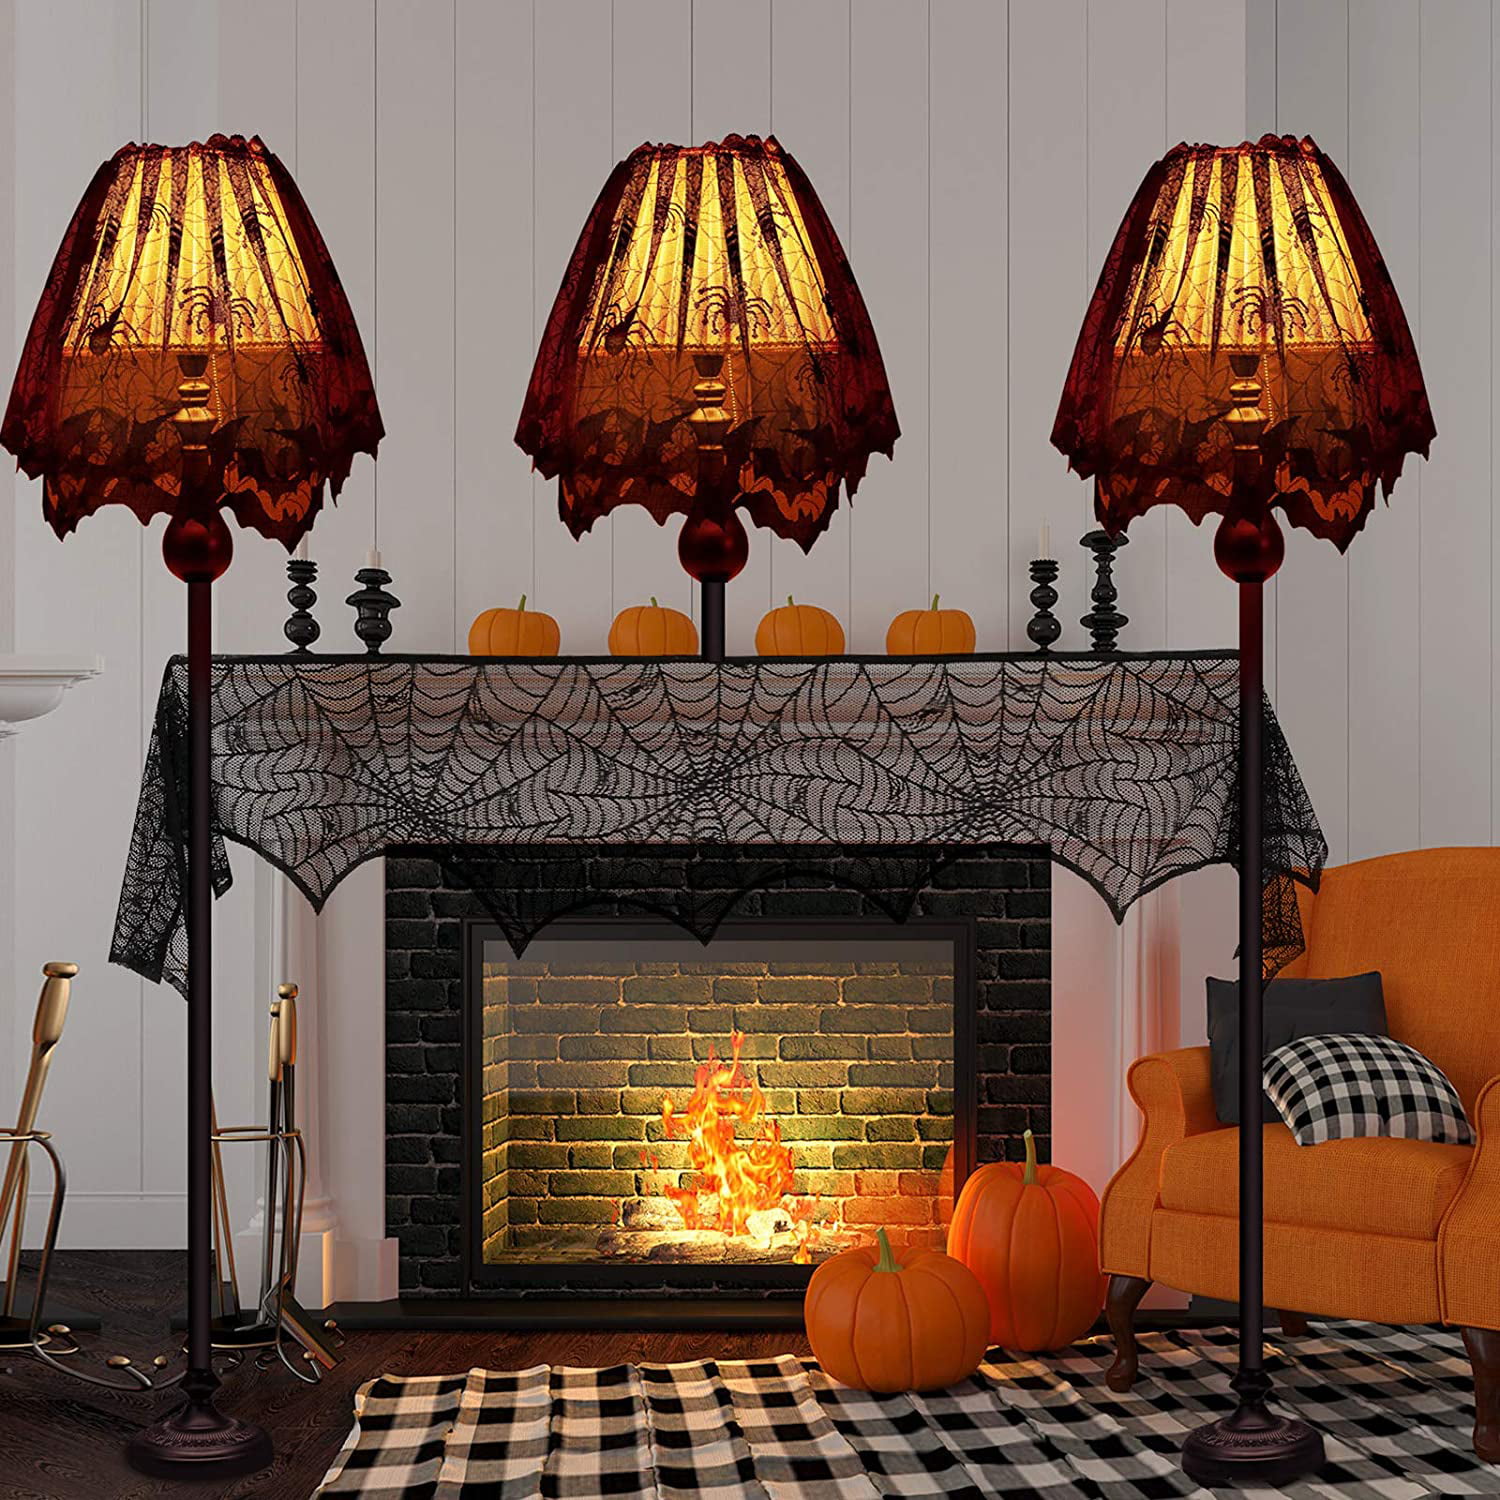 ANOTION Halloween Decorations Spider Table Runner Set Spider Cobweb 3d Bat Wall Sticker Decal Mantel Scarf Lampshade Halloween Party Decorations Office Kitchen Room Indoor Bedroom Decor